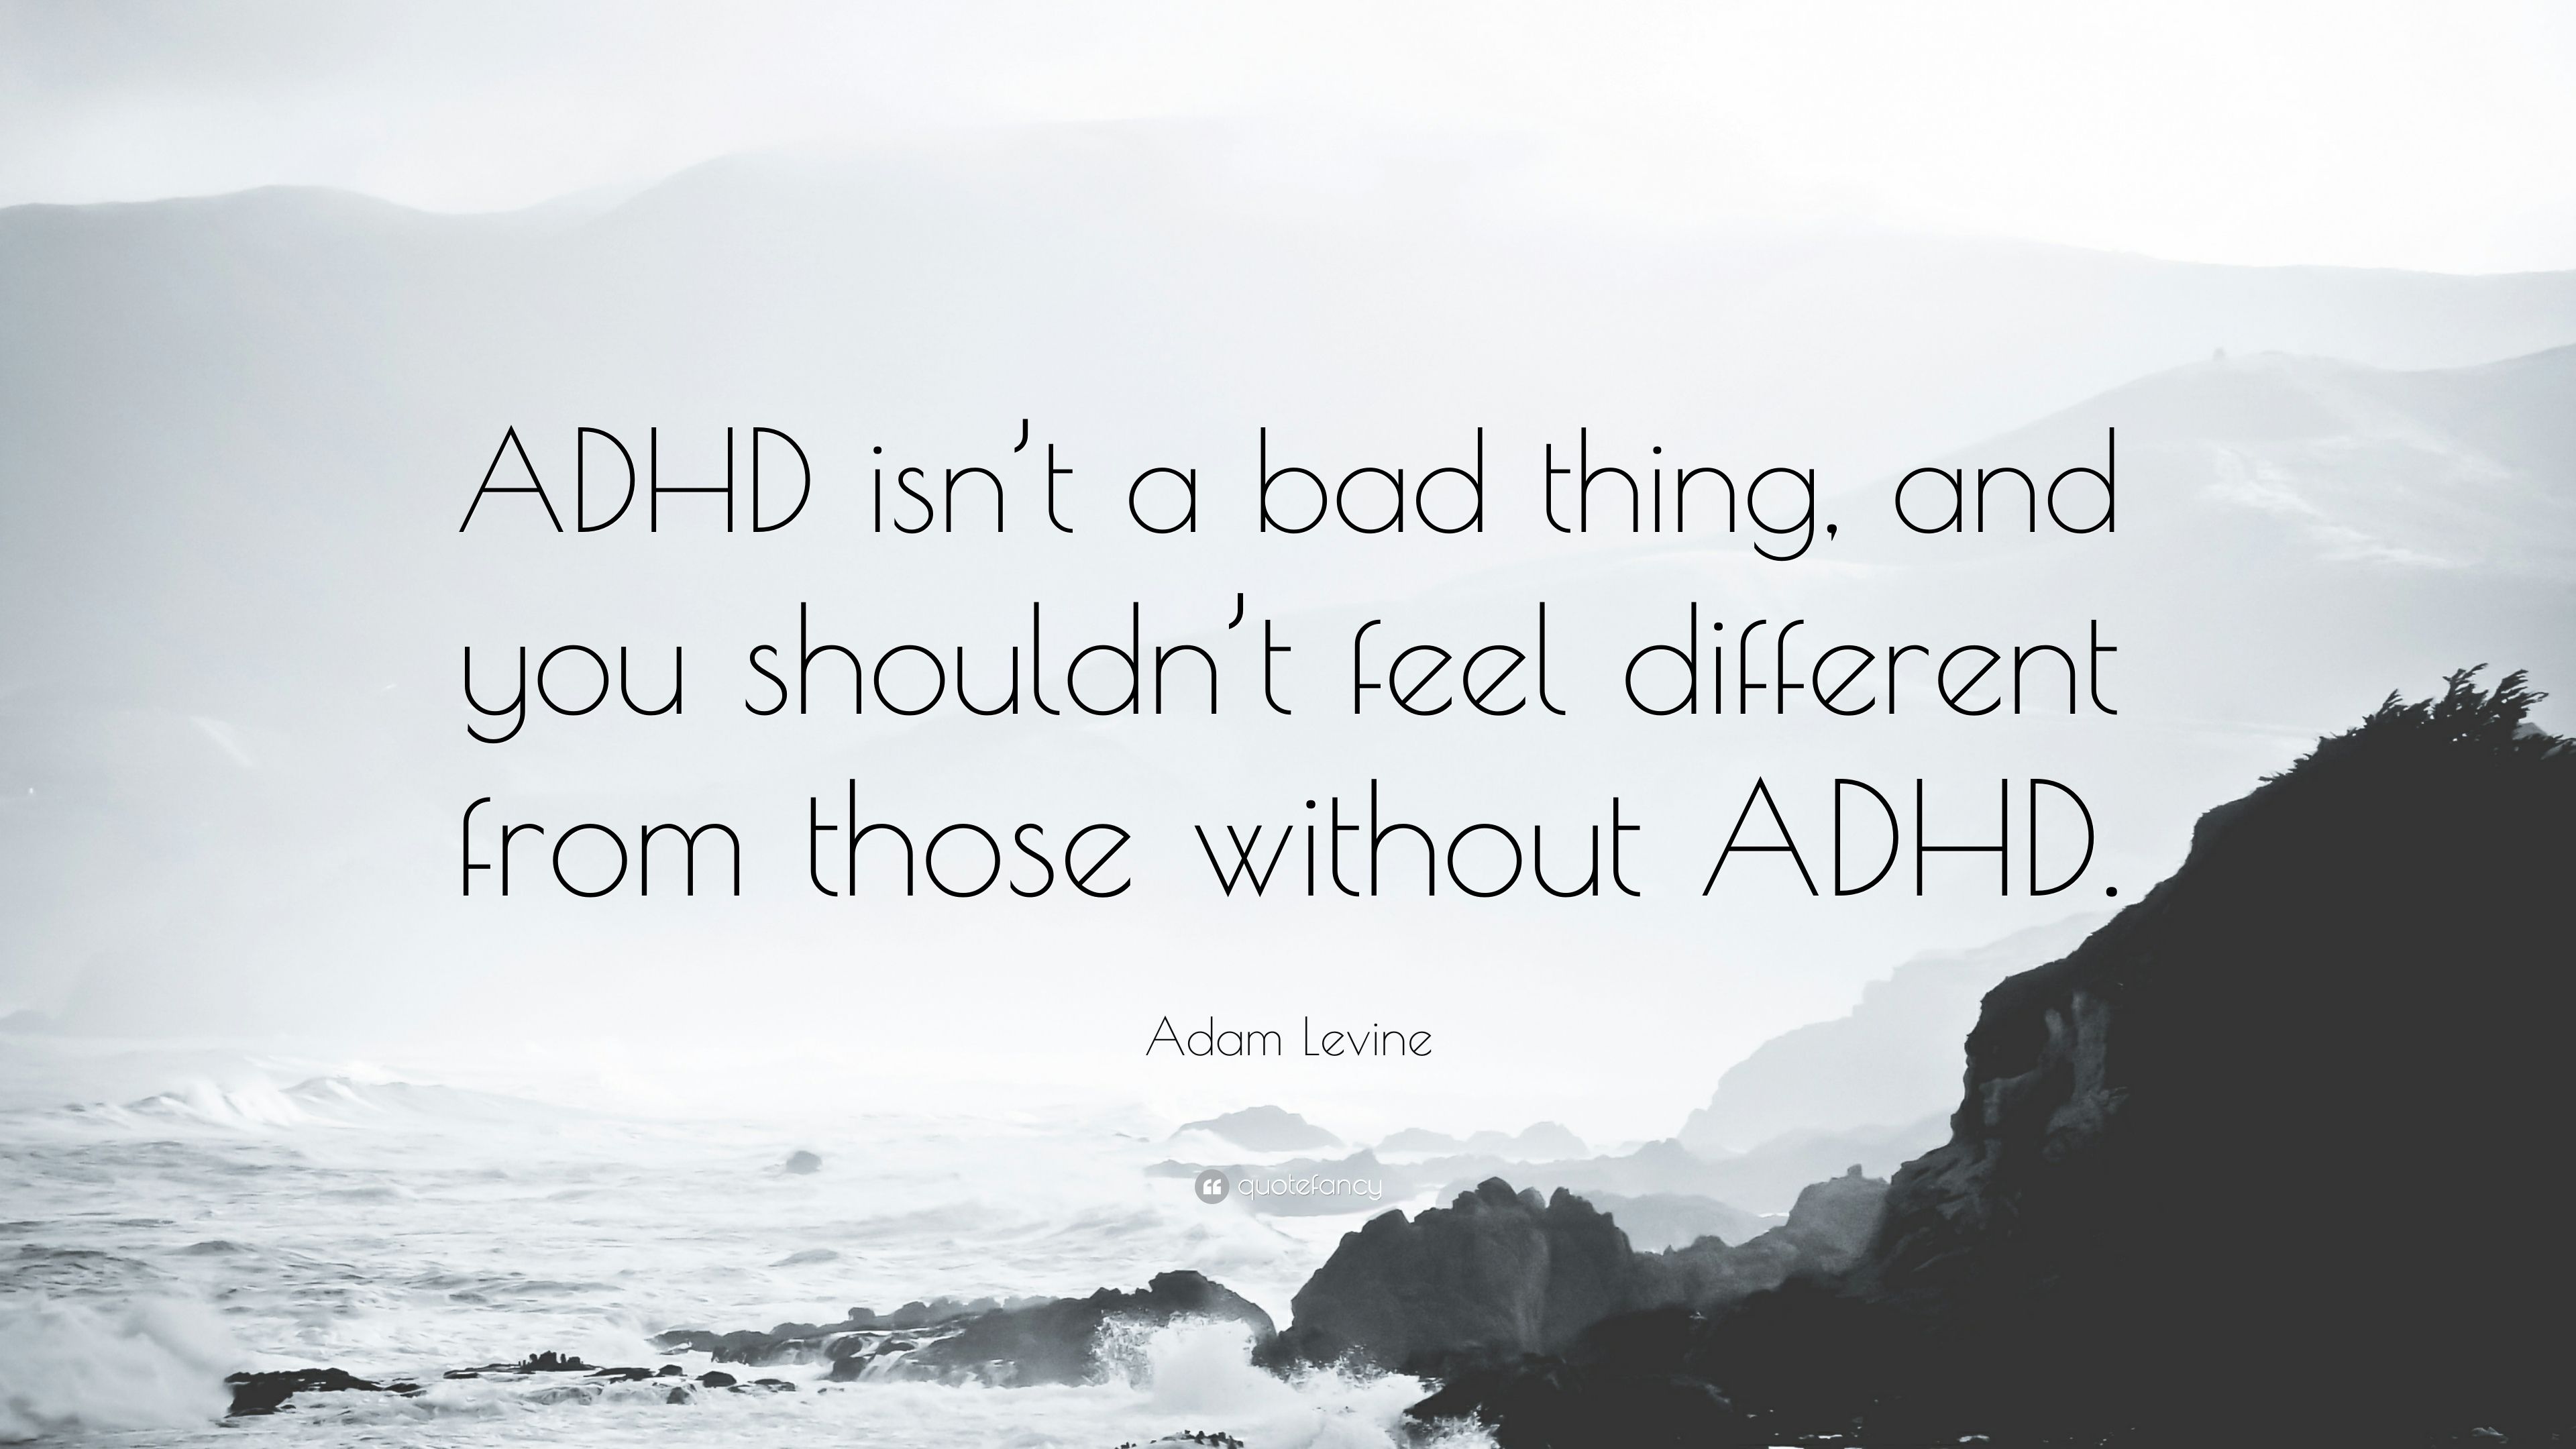 Adam Levine Quote: “ADHD isn't a bad thing, and you shouldn't feel